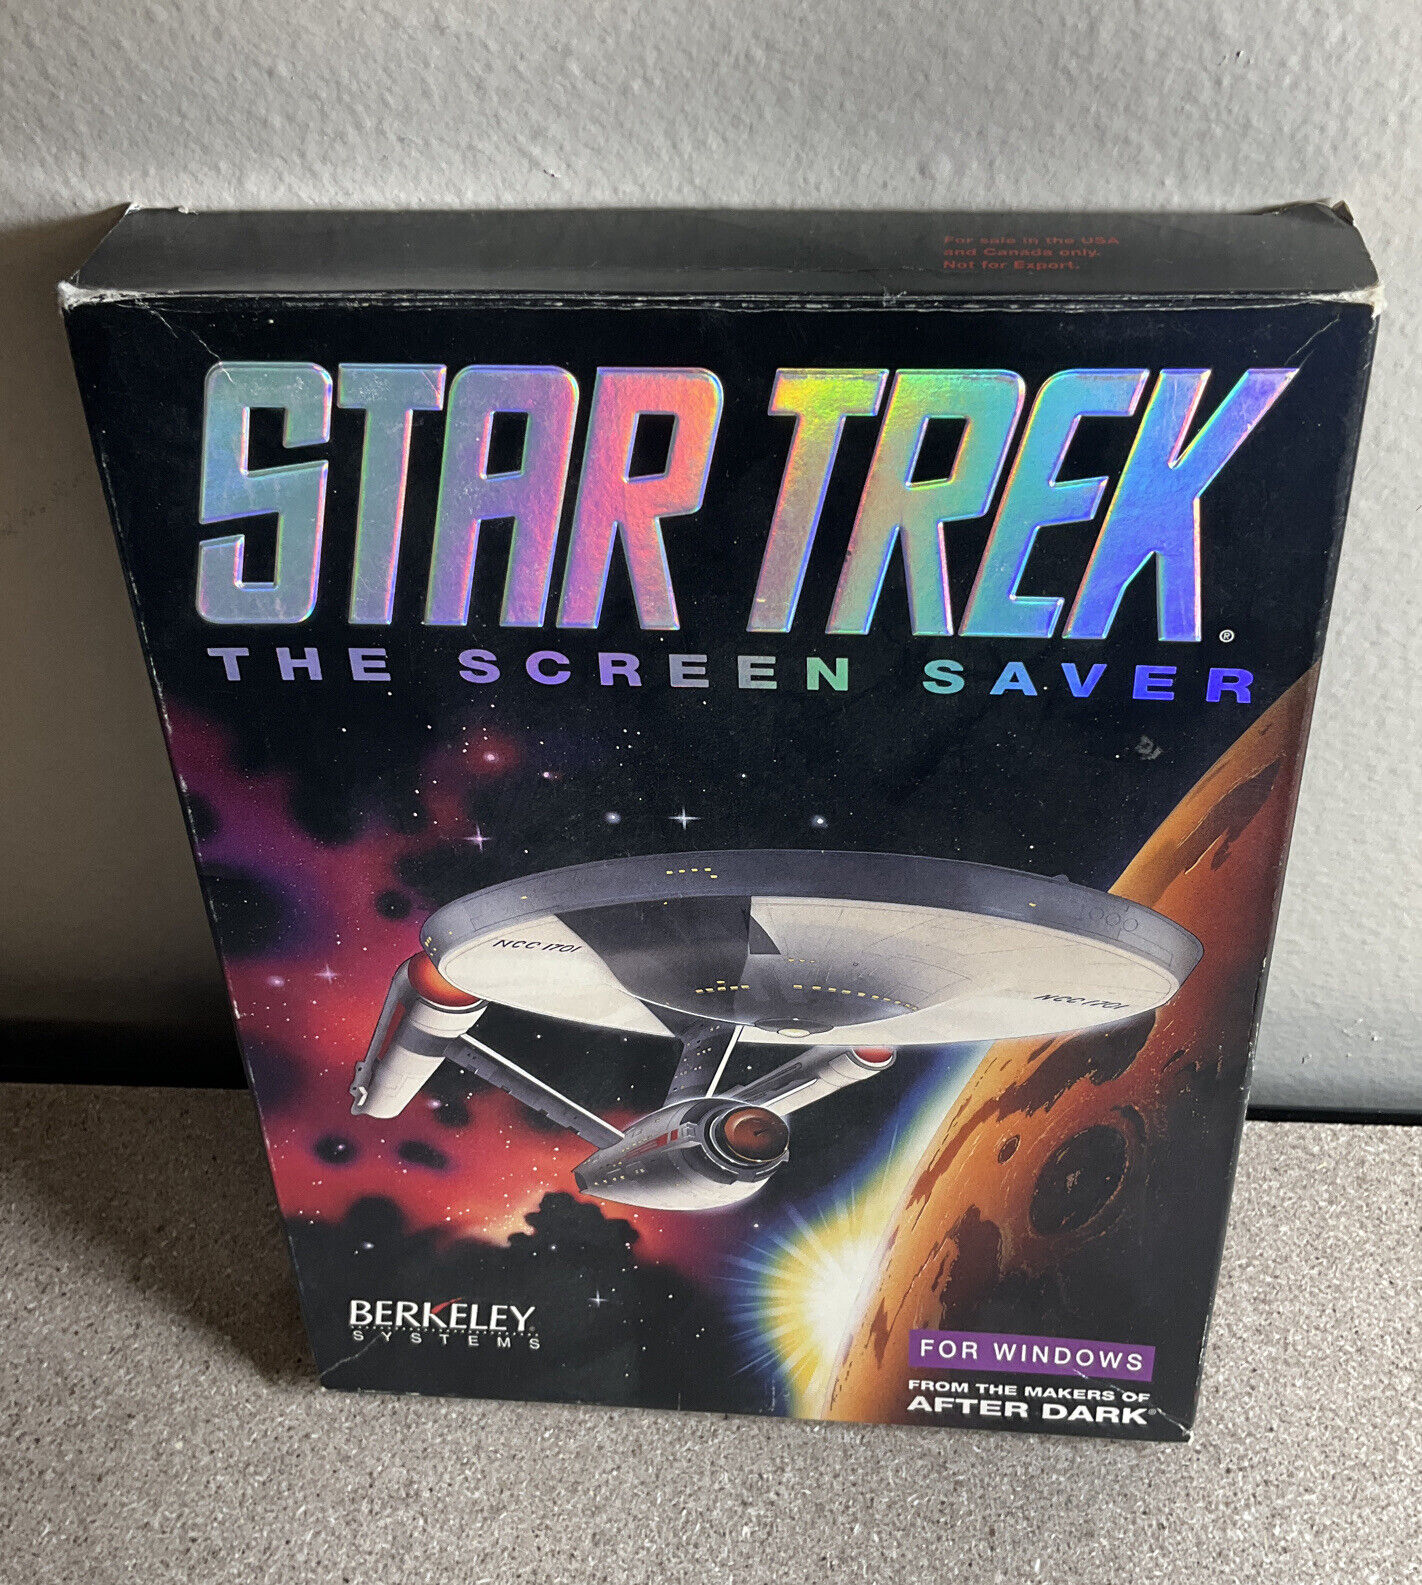 Star Trek The Screen Saver for Windows by Berkley Systems 1992 disks and manual